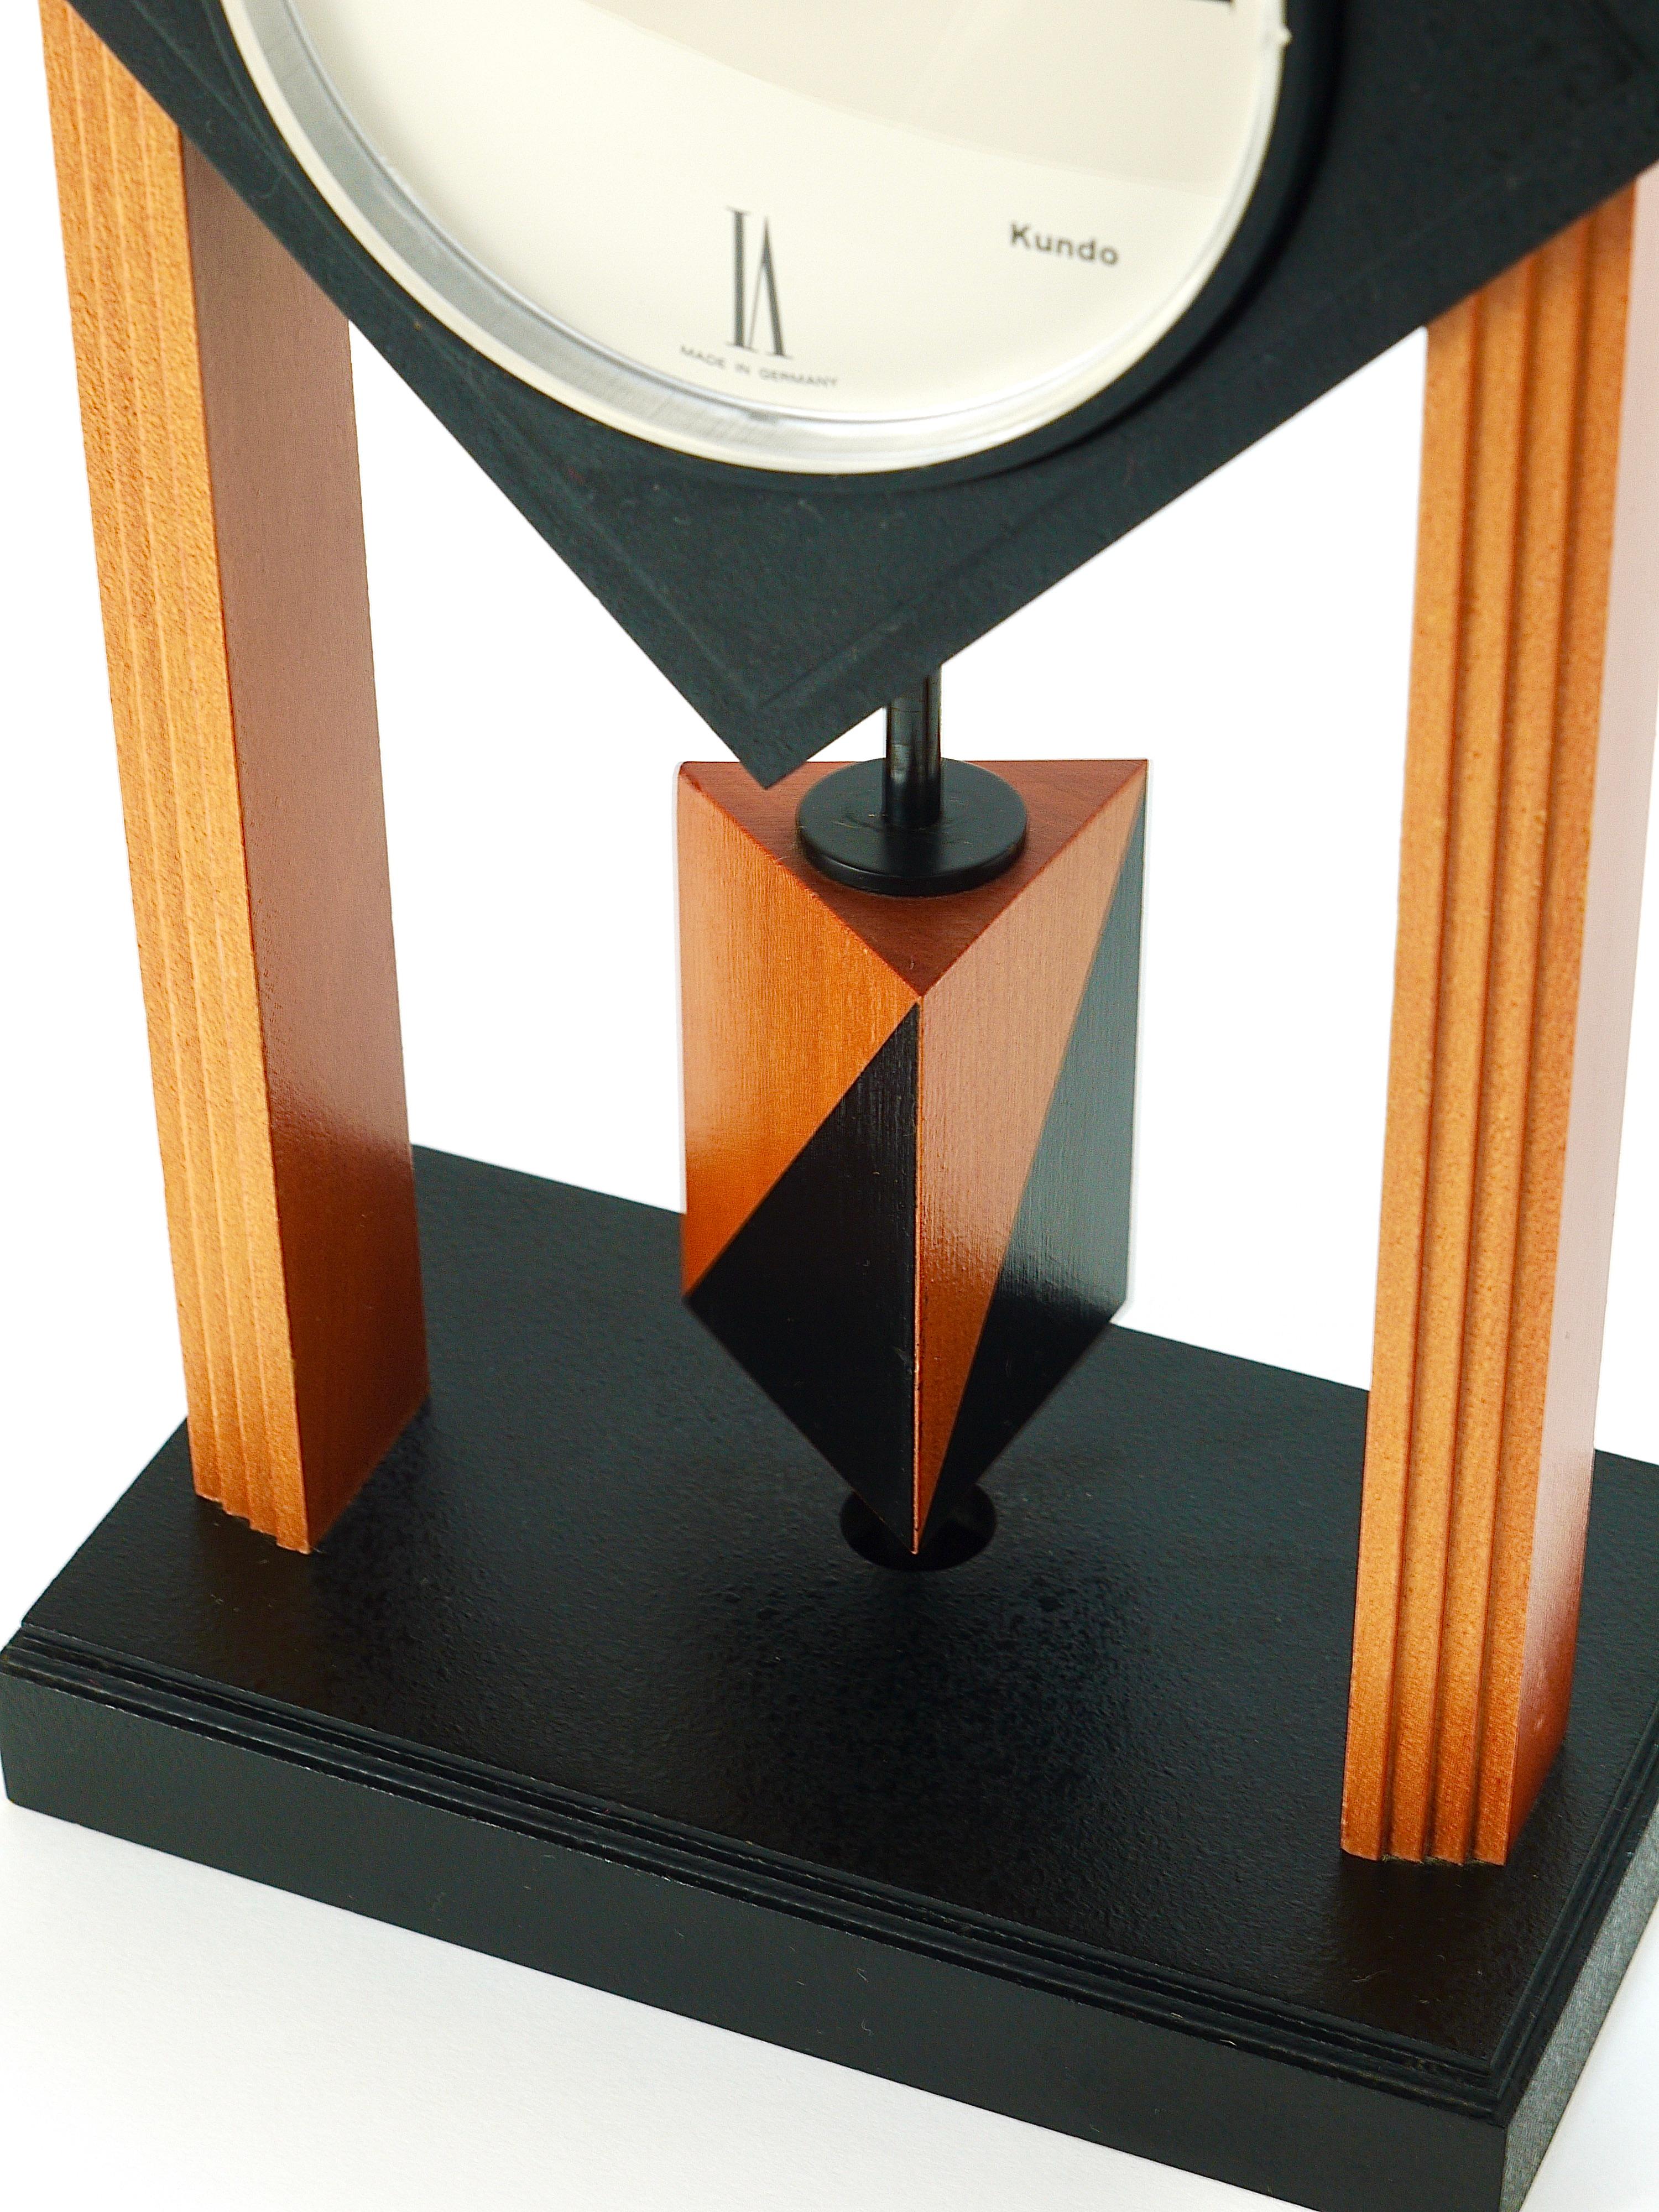 Postmodern Memphis Milano Style Torsion Pendulum Table Clock by Kundo Germany For Sale 2